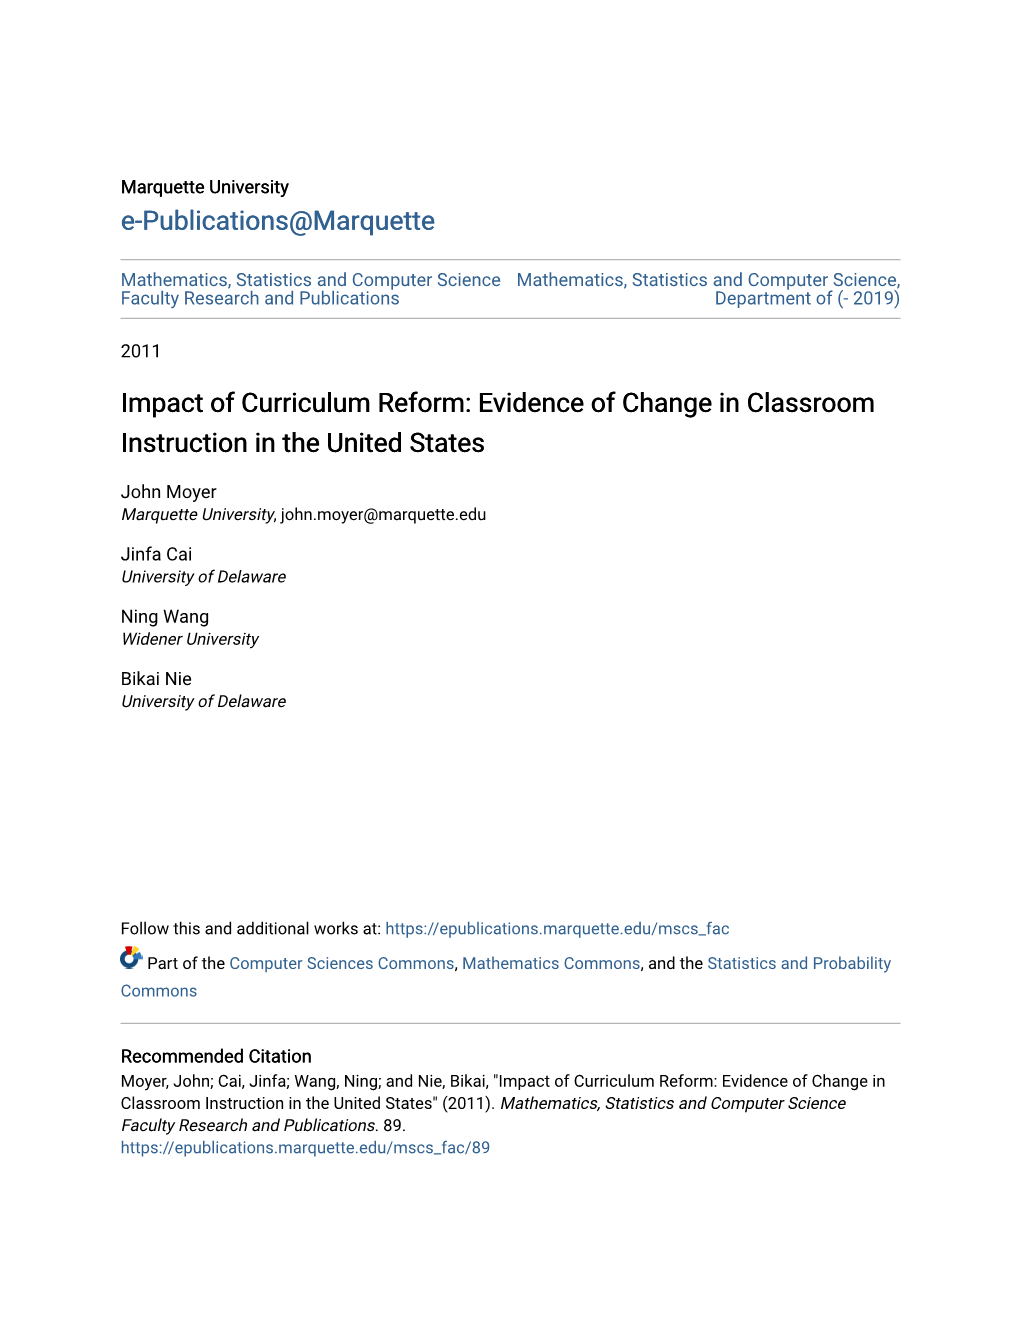 Impact of Curriculum Reform: Evidence of Change in Classroom Instruction in the United States